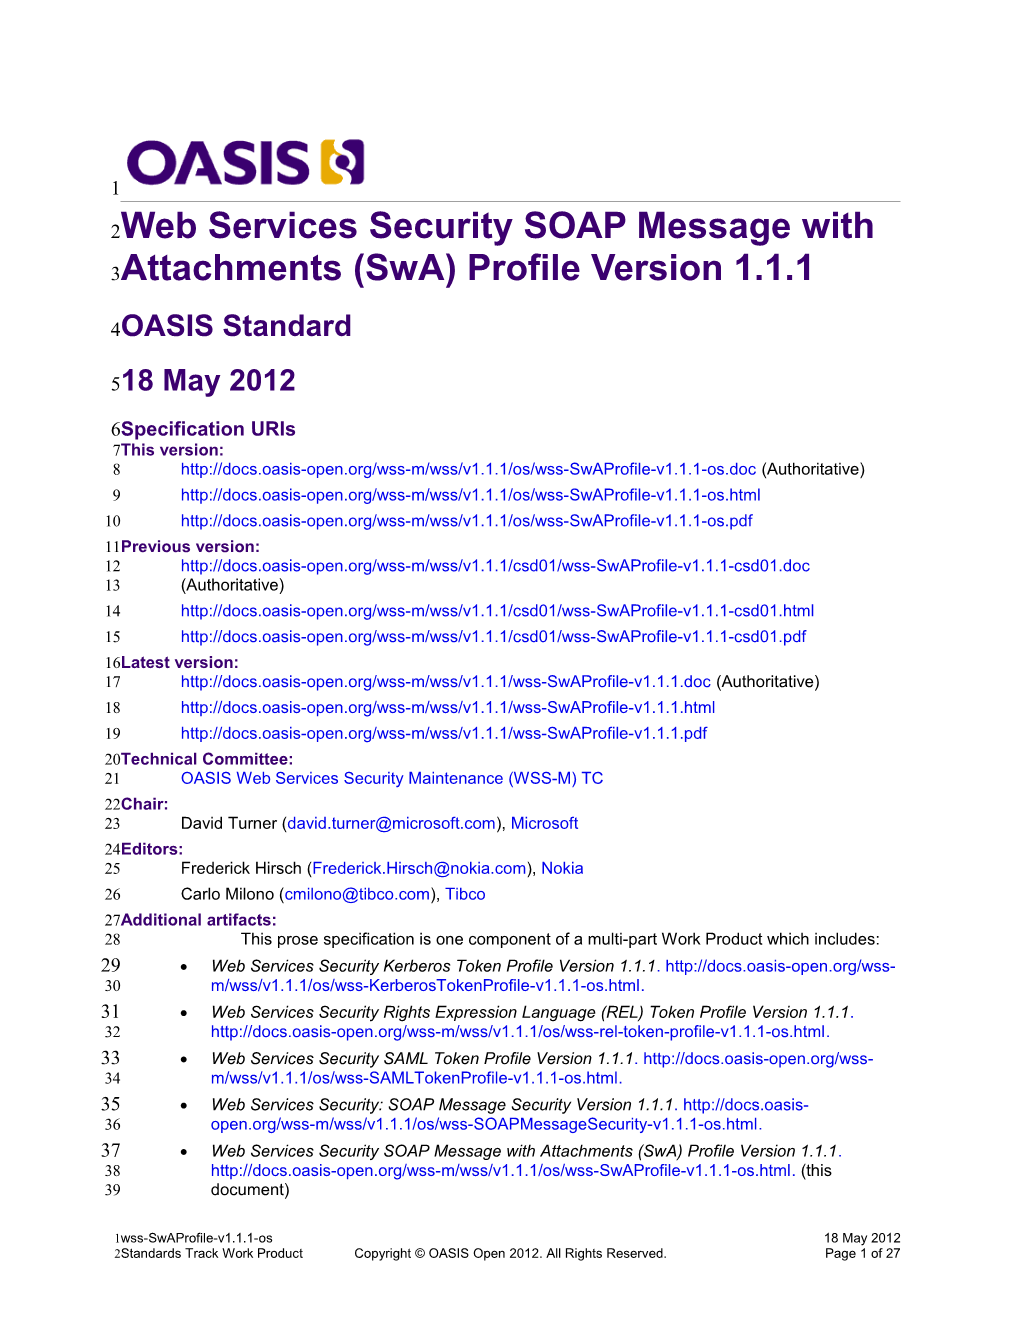 Web Services Security SOAP Messages with Attachments (Swa) Profile Version 1.1.1